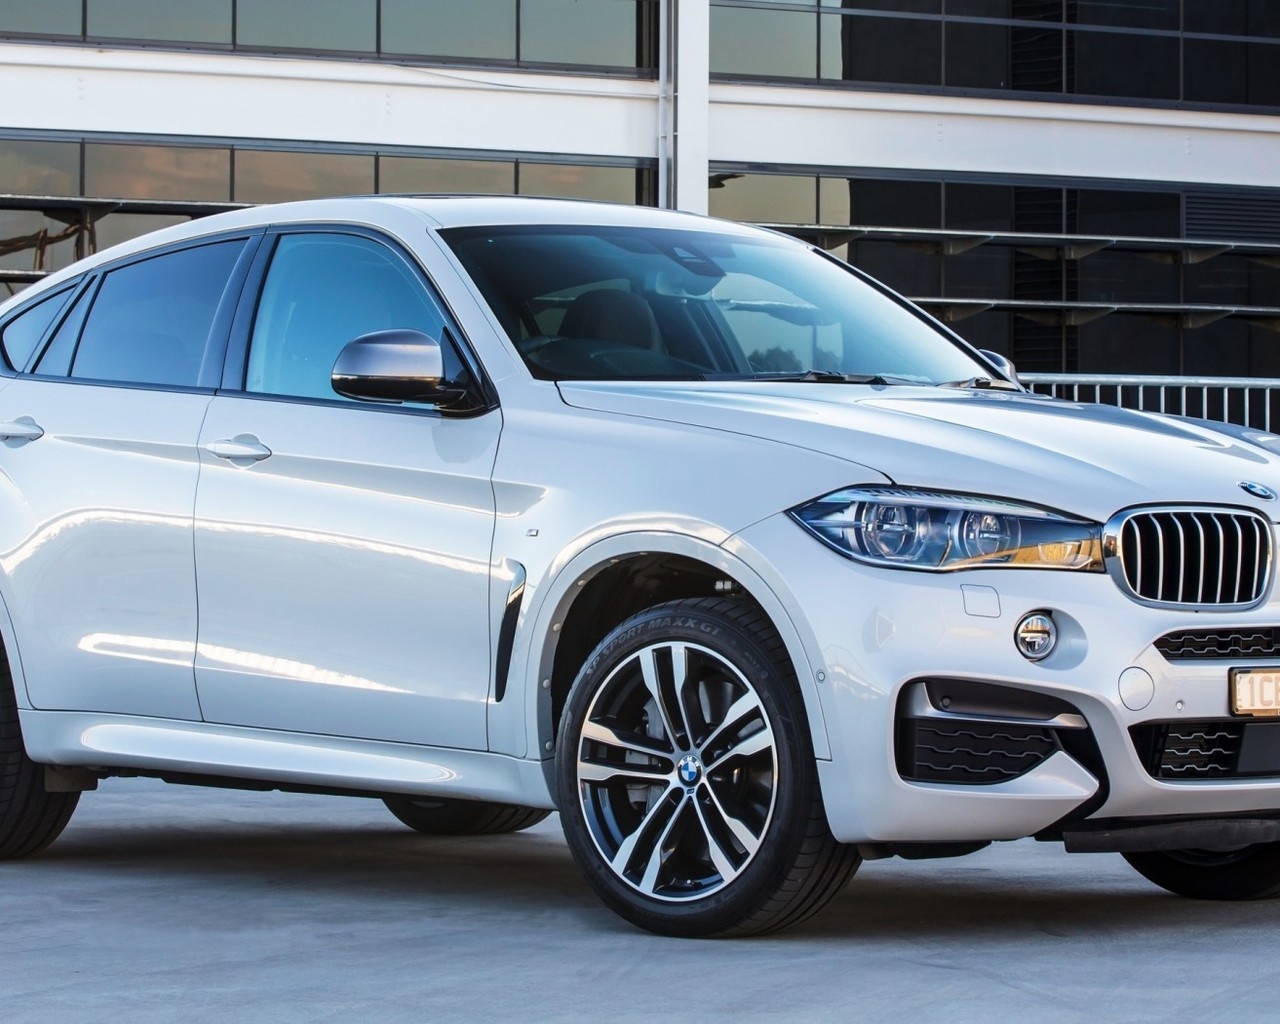 2015 BMW X6 M50D for 1280 x 1024 resolution